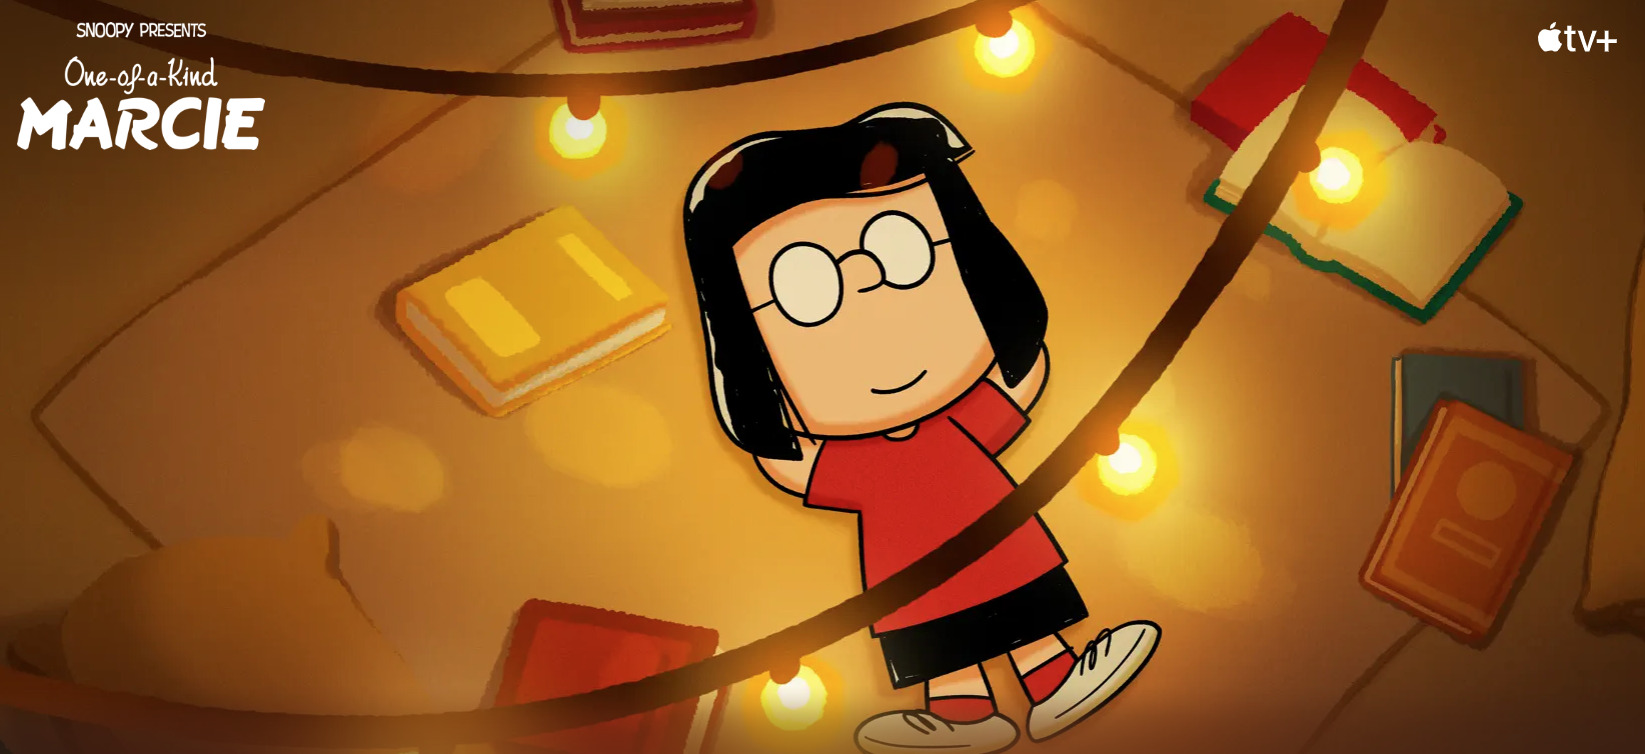 The Peanuts Gang Return in a New Special "Snoopy Presents: One-of-a-Kind Marcie"